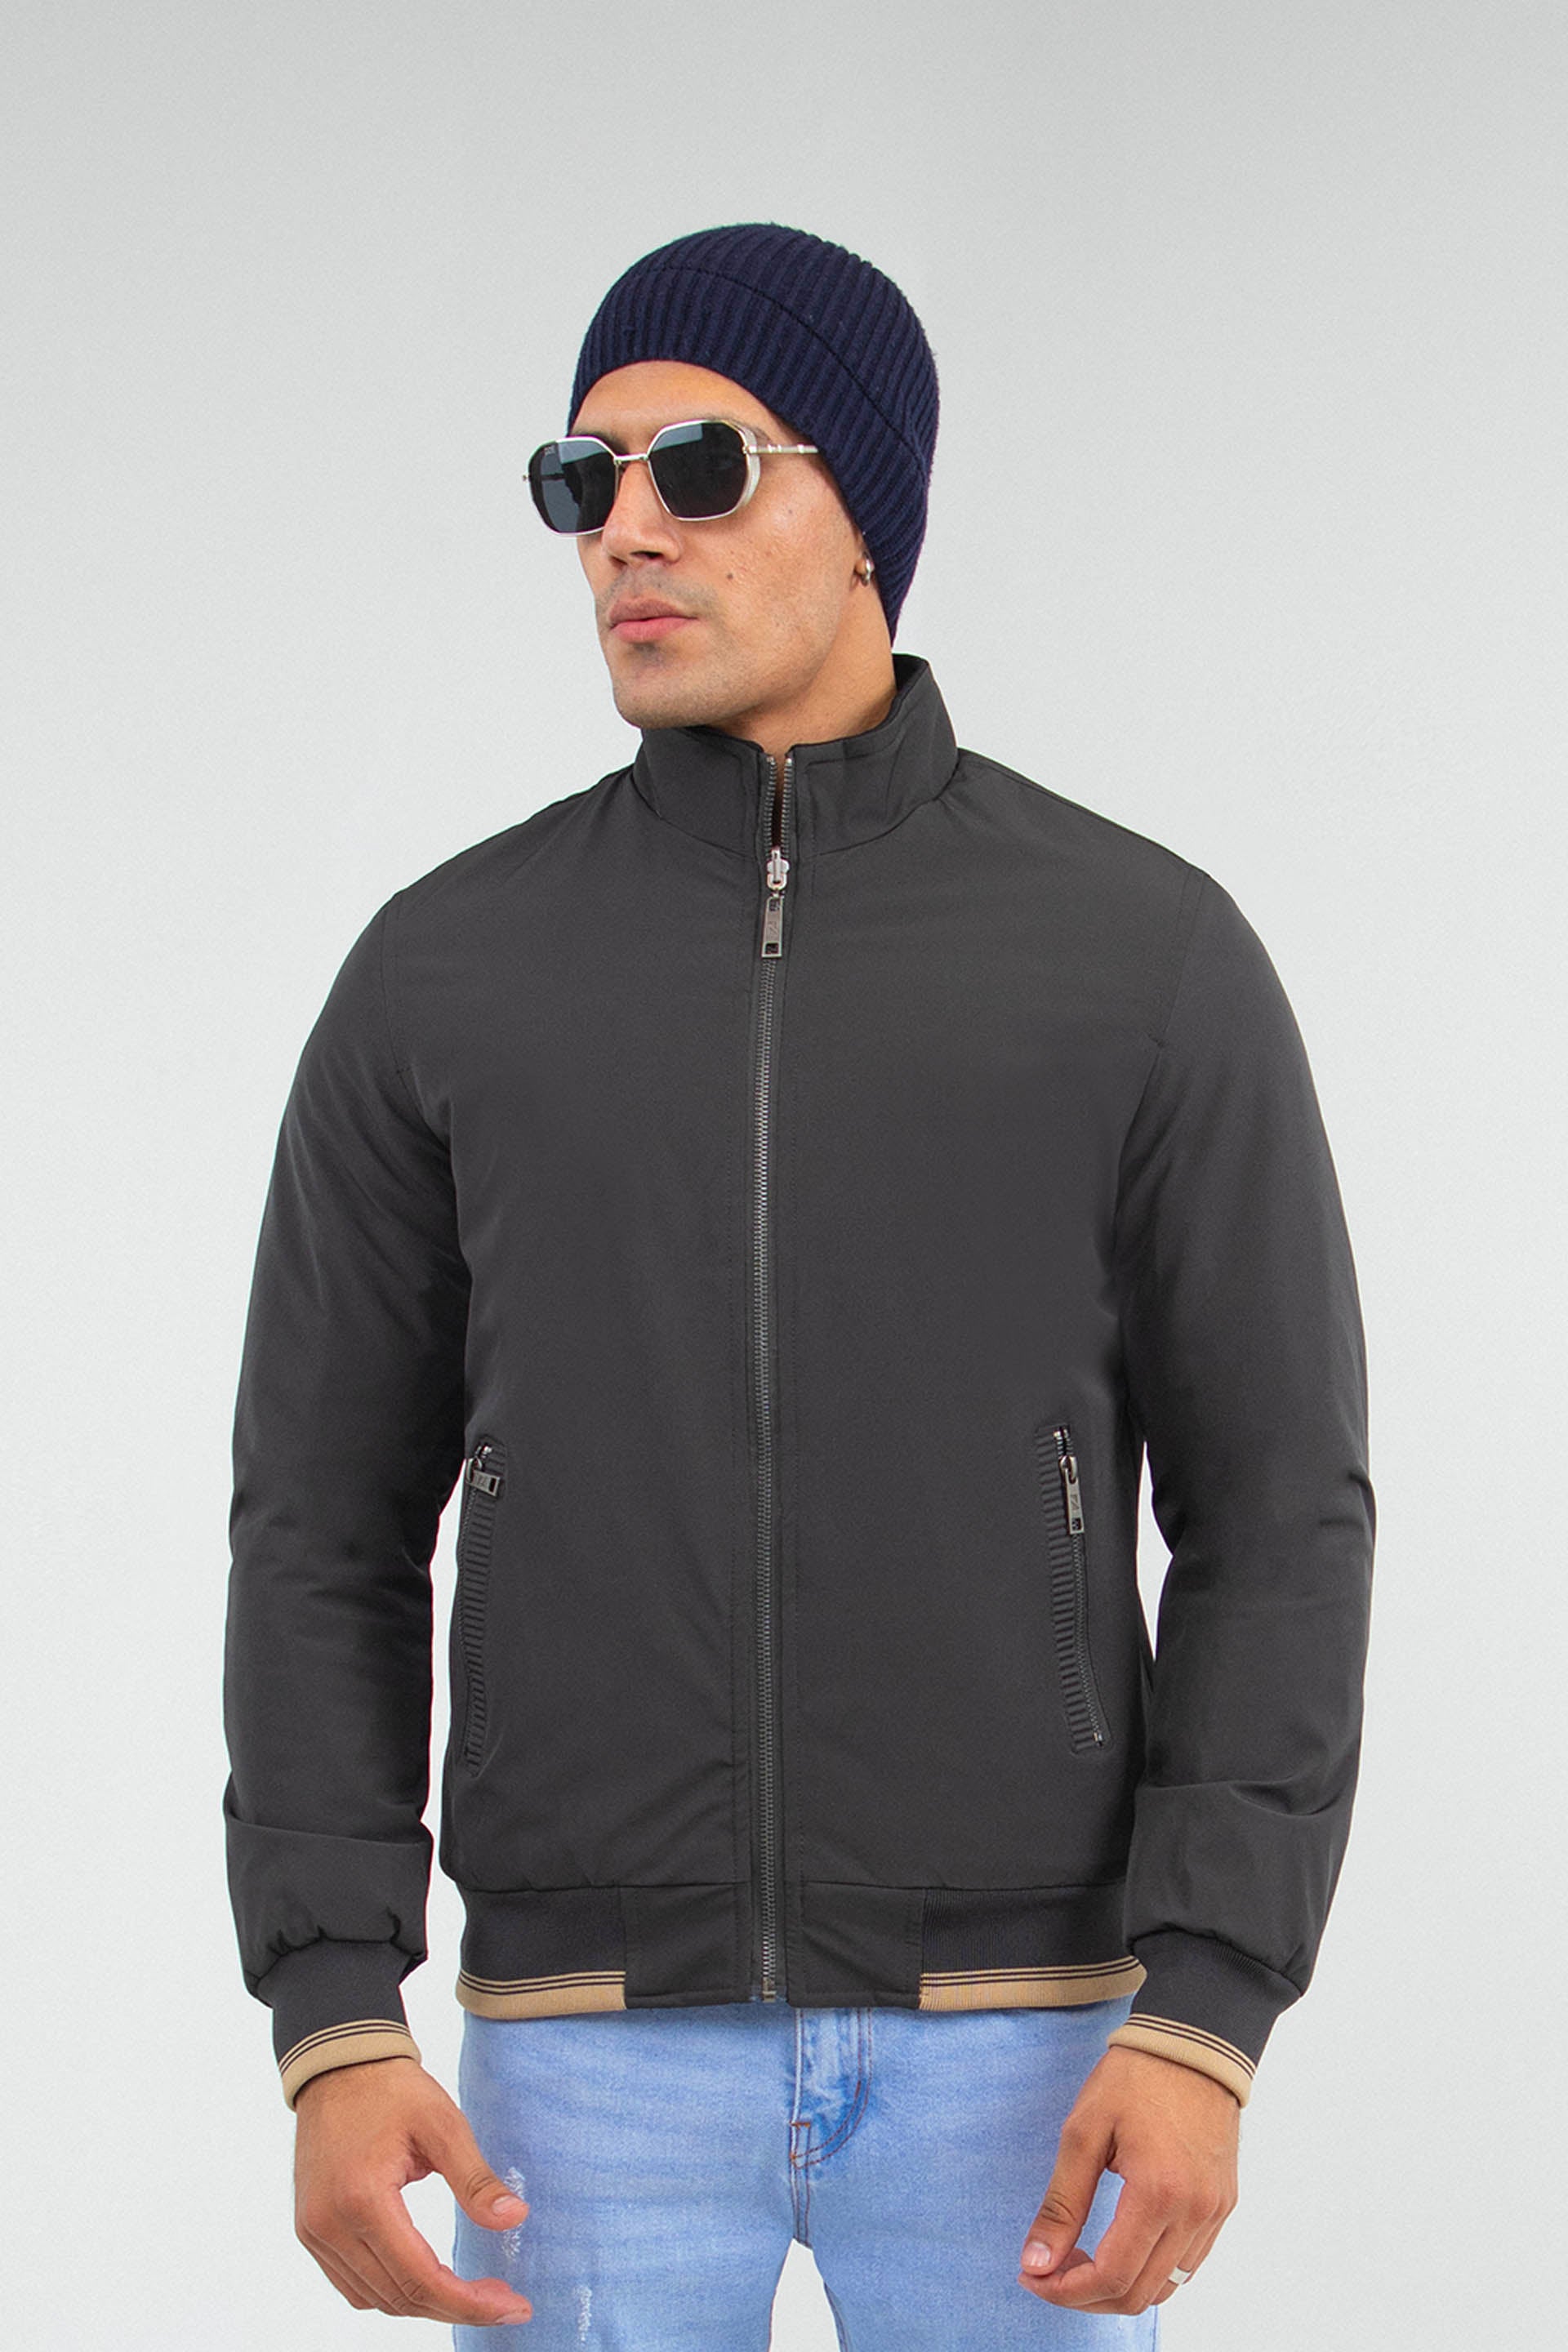 Get 2 in 1 convertible jackets at Flat 50% off!